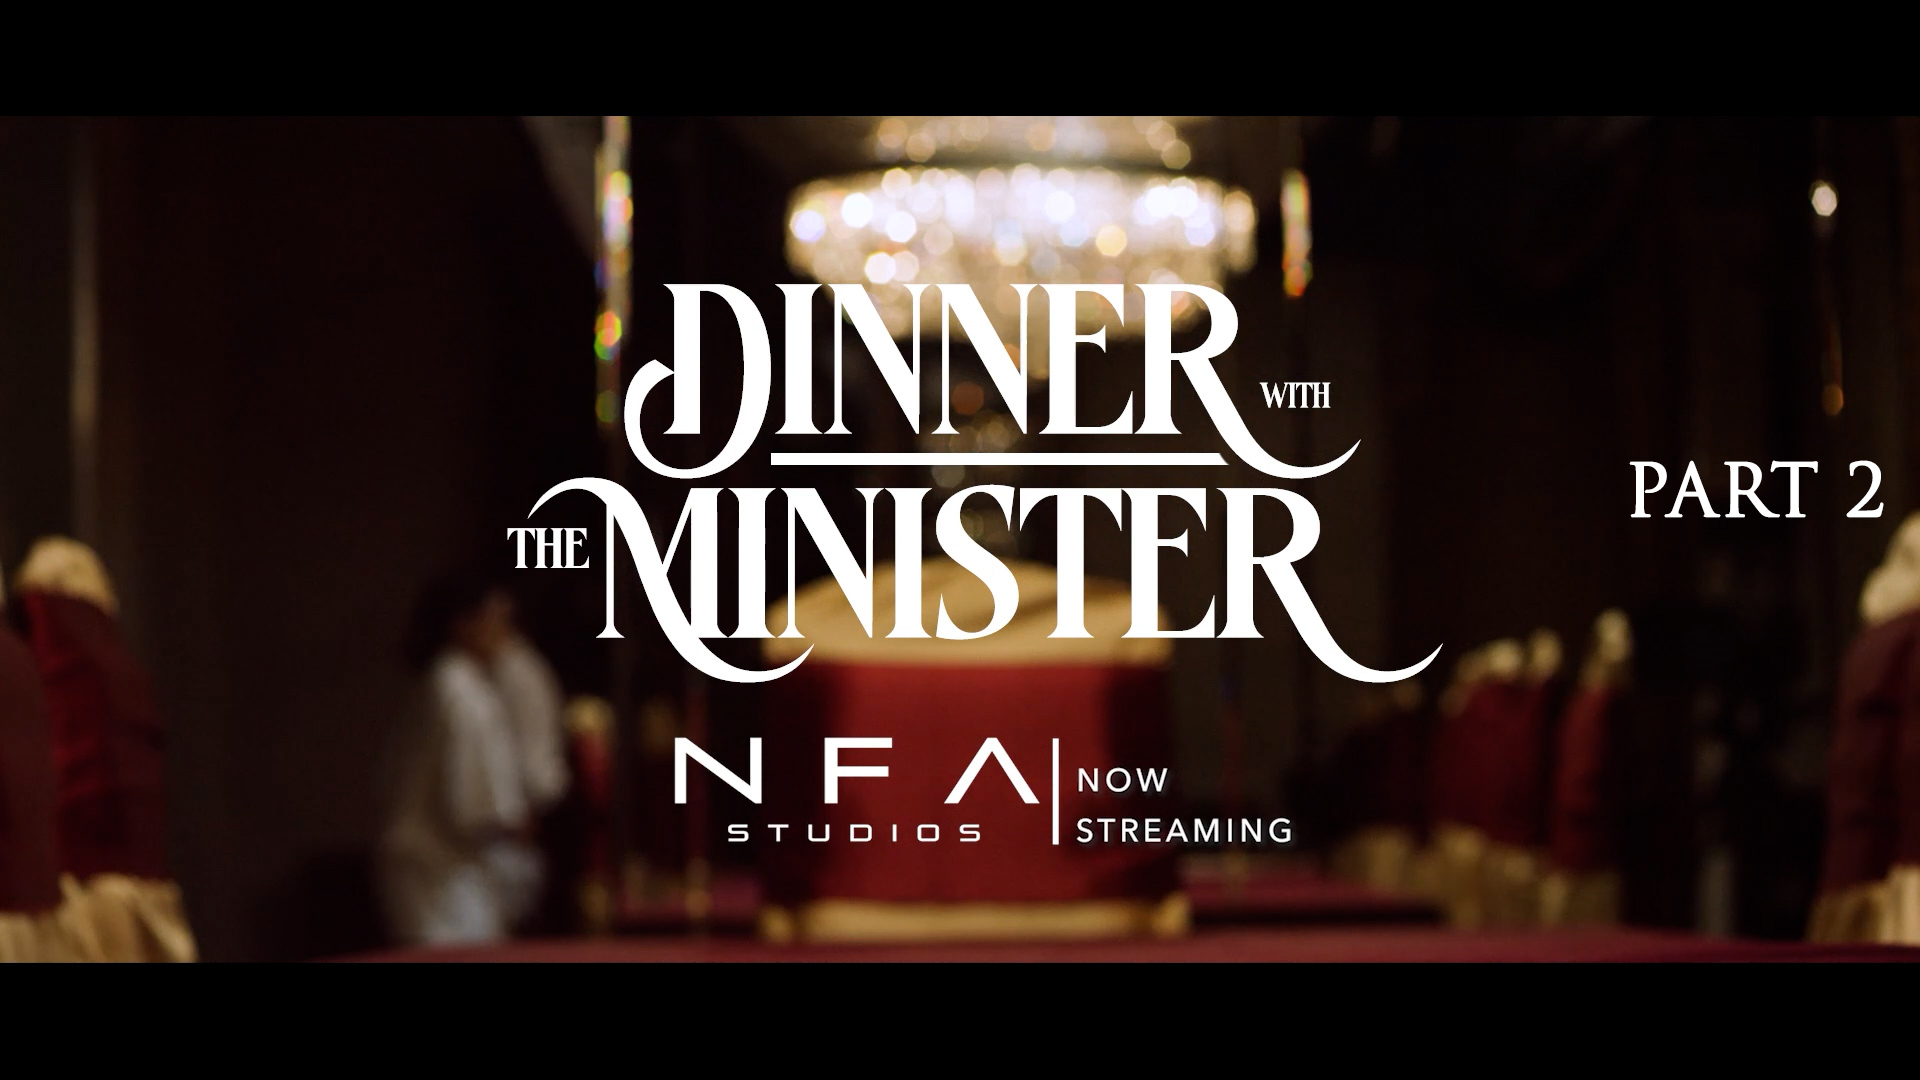 Part 2: NFA Studios presents Dinner with The Minister